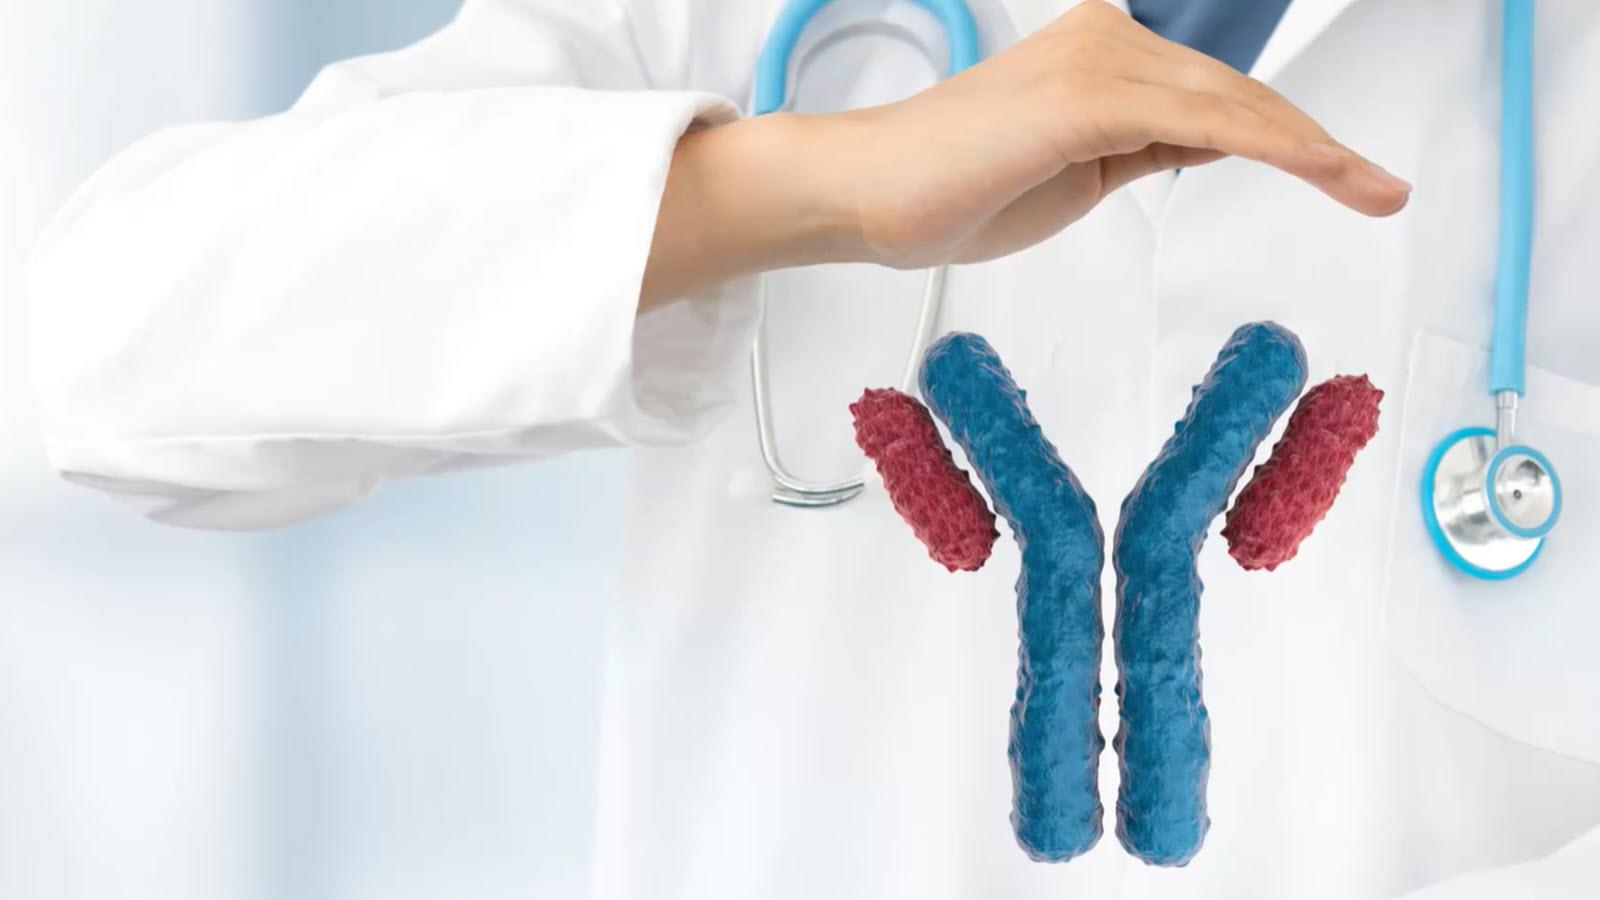 An illustration of a Y-shaped antibody against a backdrop of a doctor's coat with stethoscope